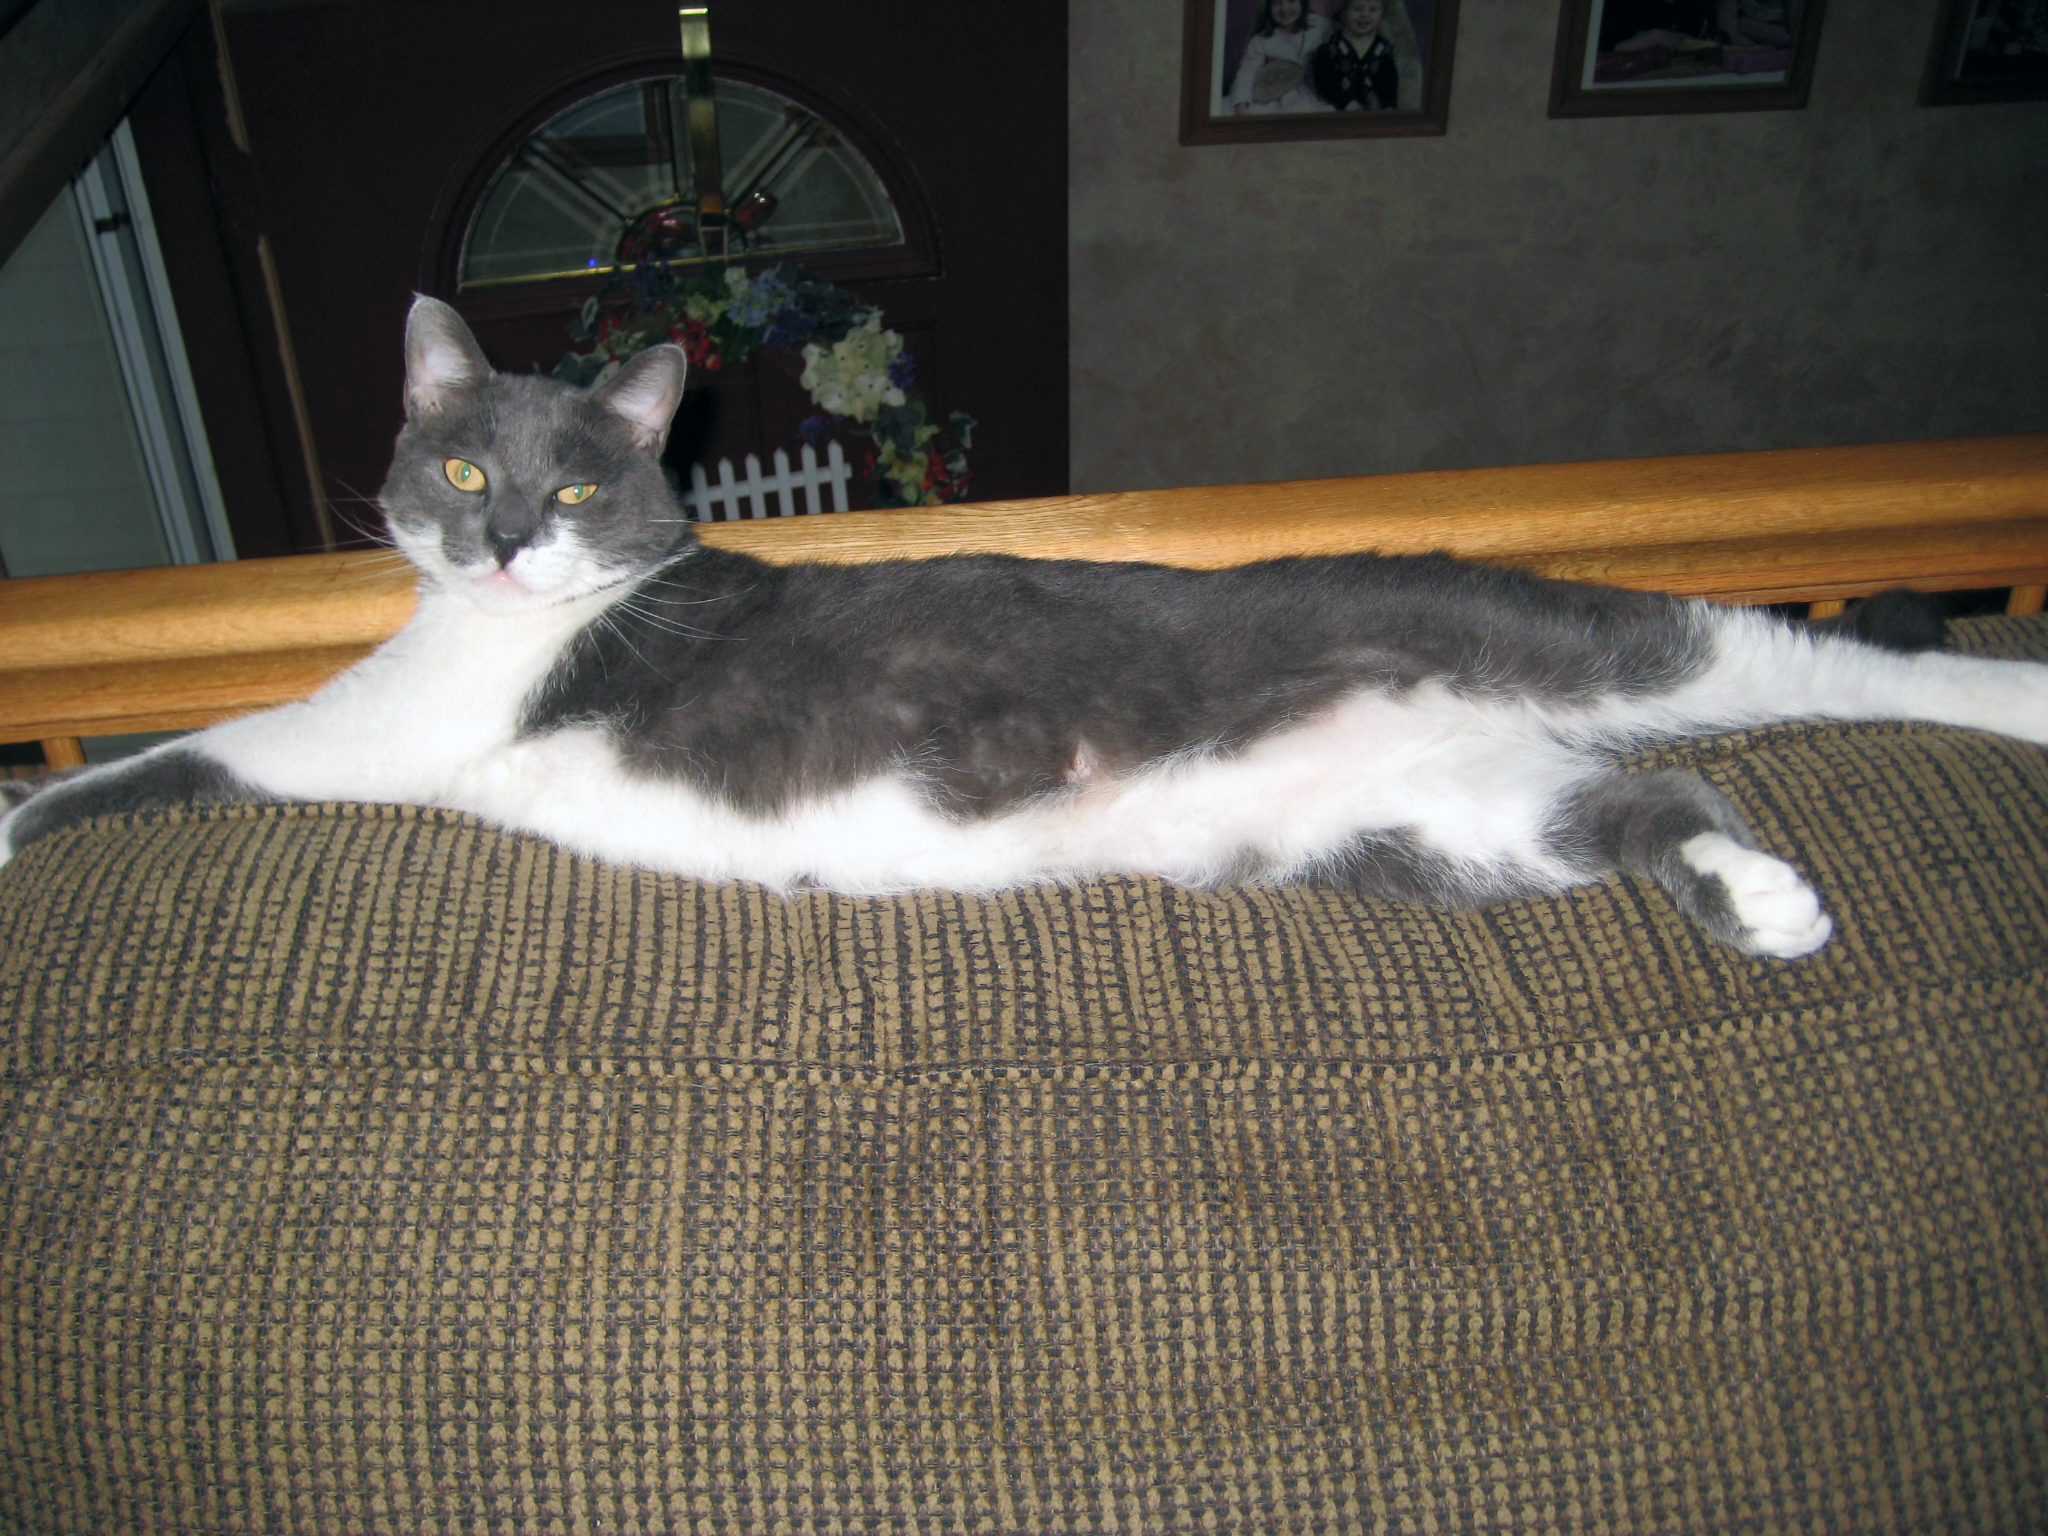 Joey the grey and white cat streatching out on top of the couch